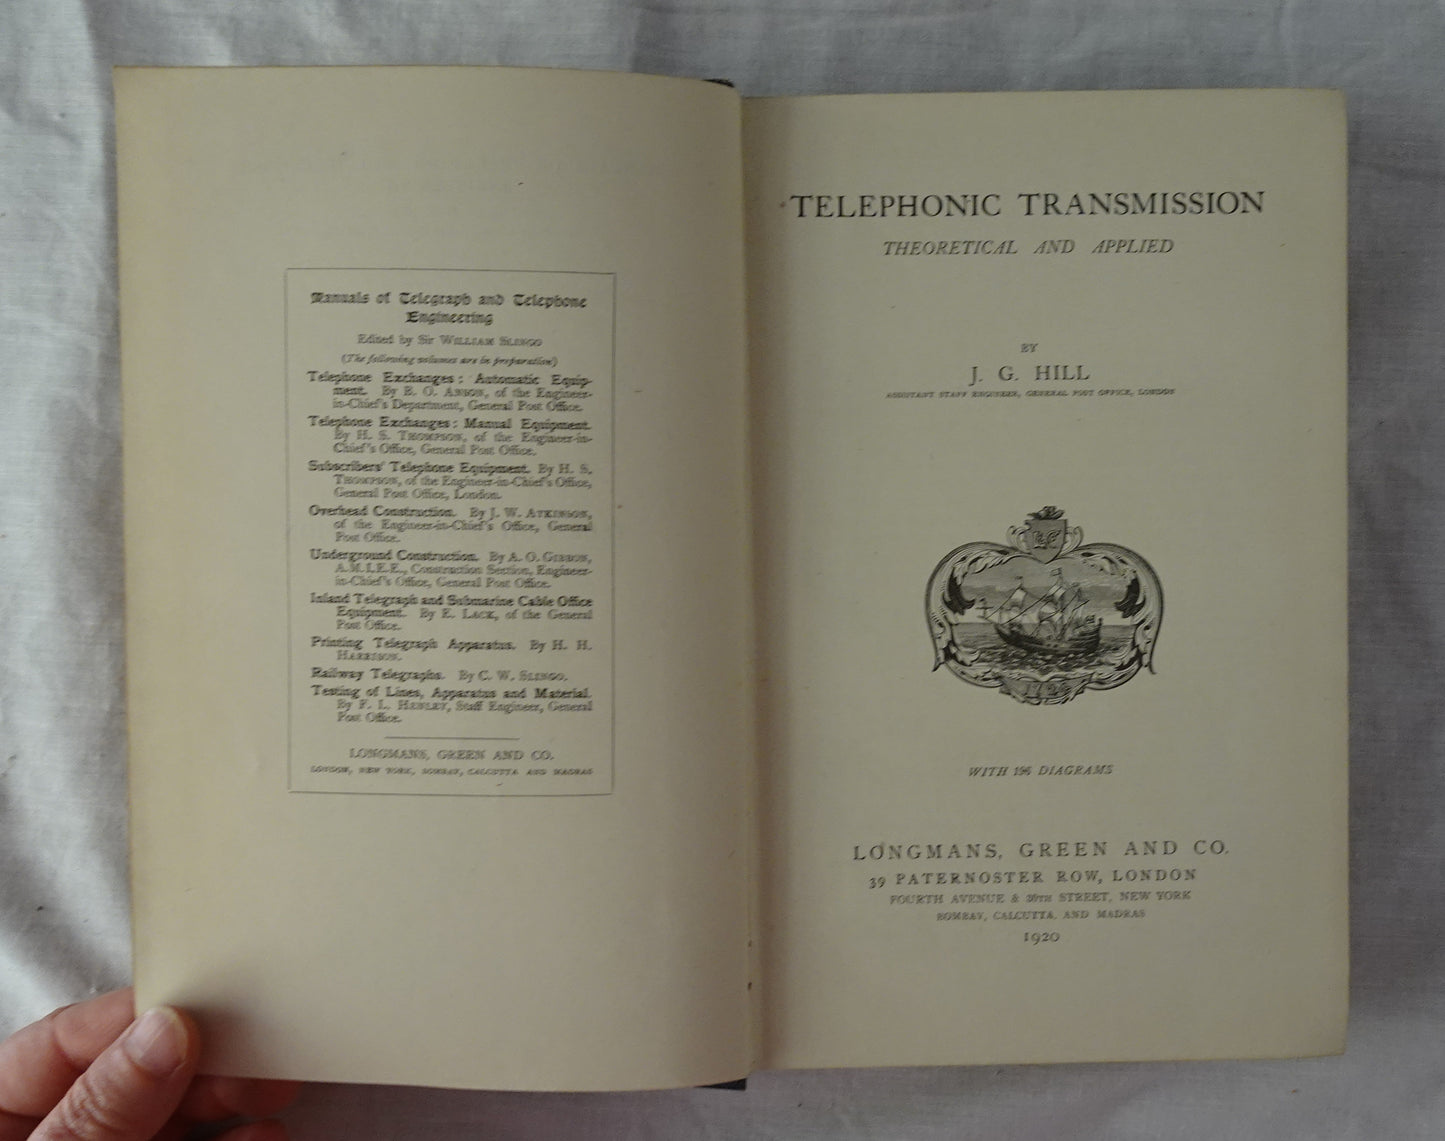 Telephonic Transmission by J. G. Hill